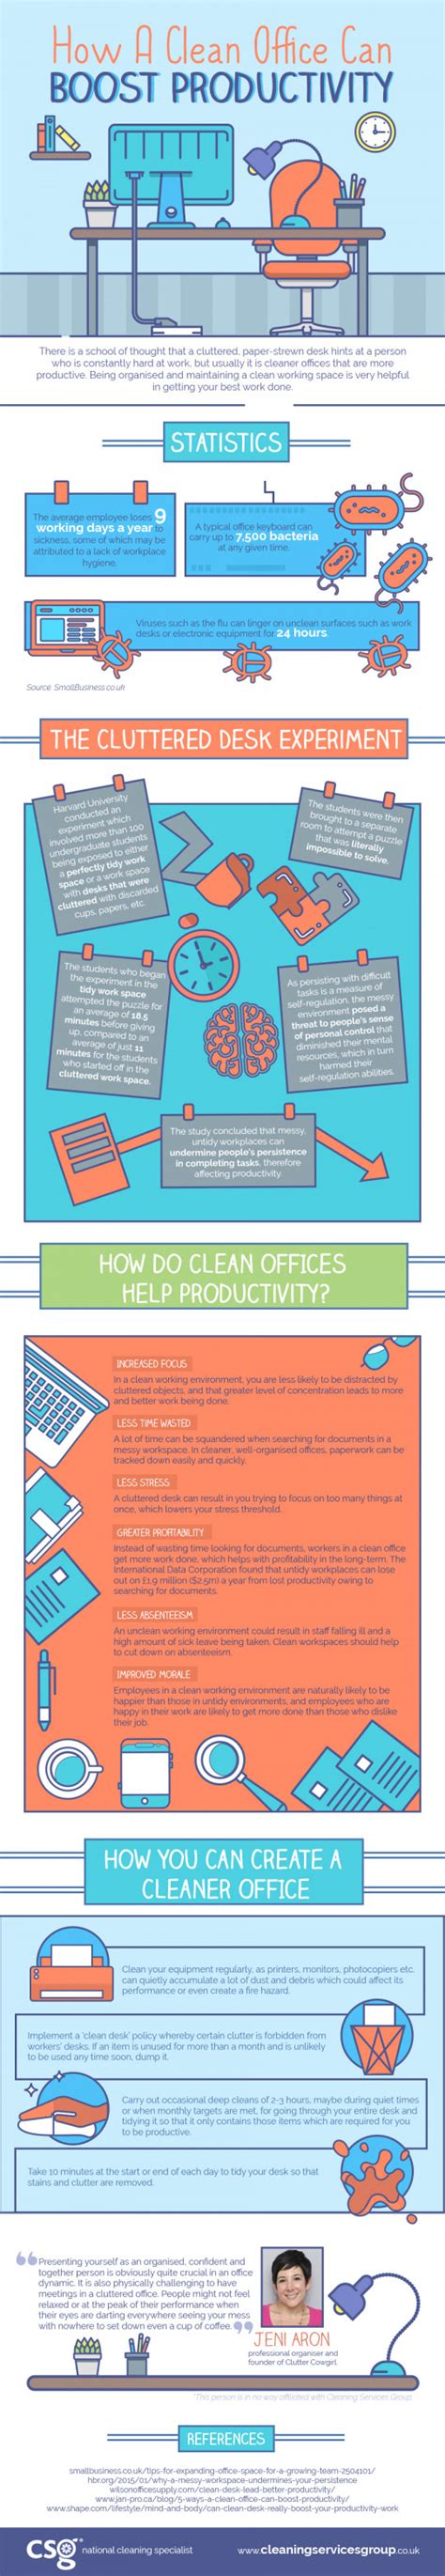 How A Clean Office Can Boost Productivity Infographic Mike